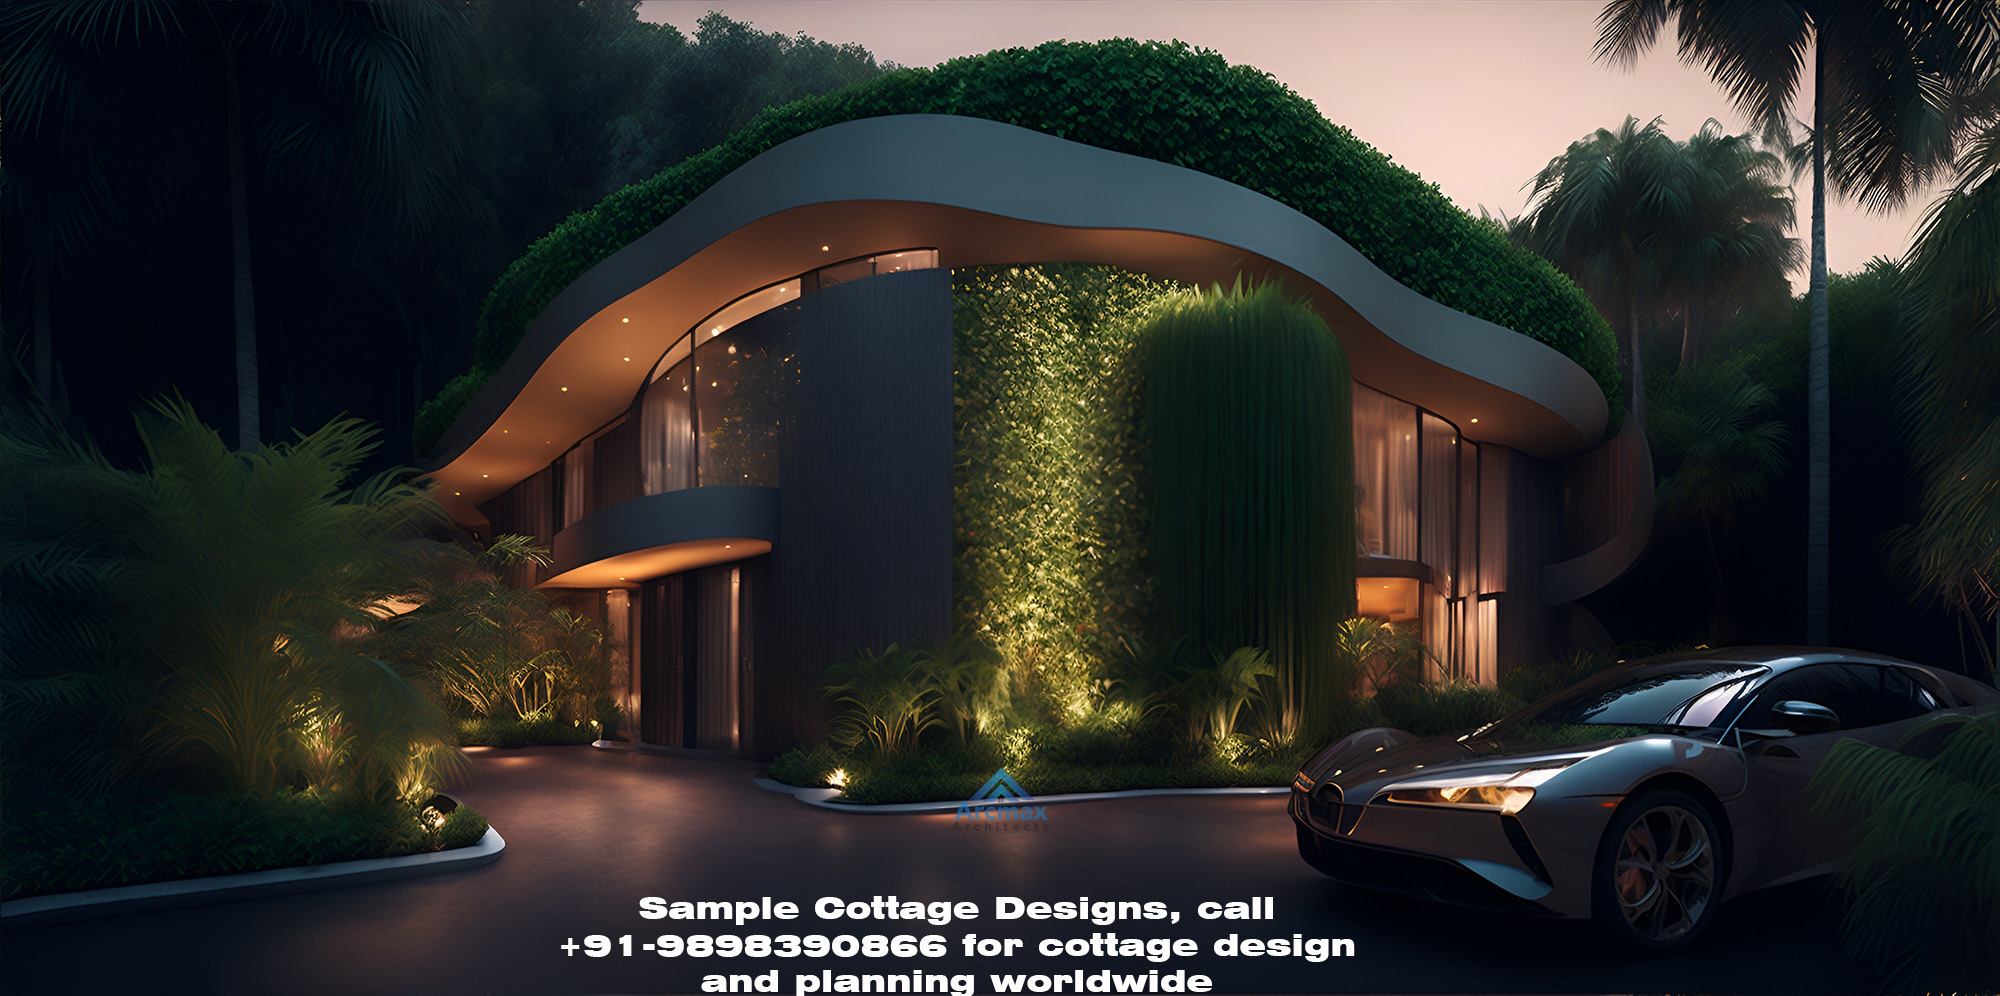 Sample Cottage Design Architects in Hyderabad India